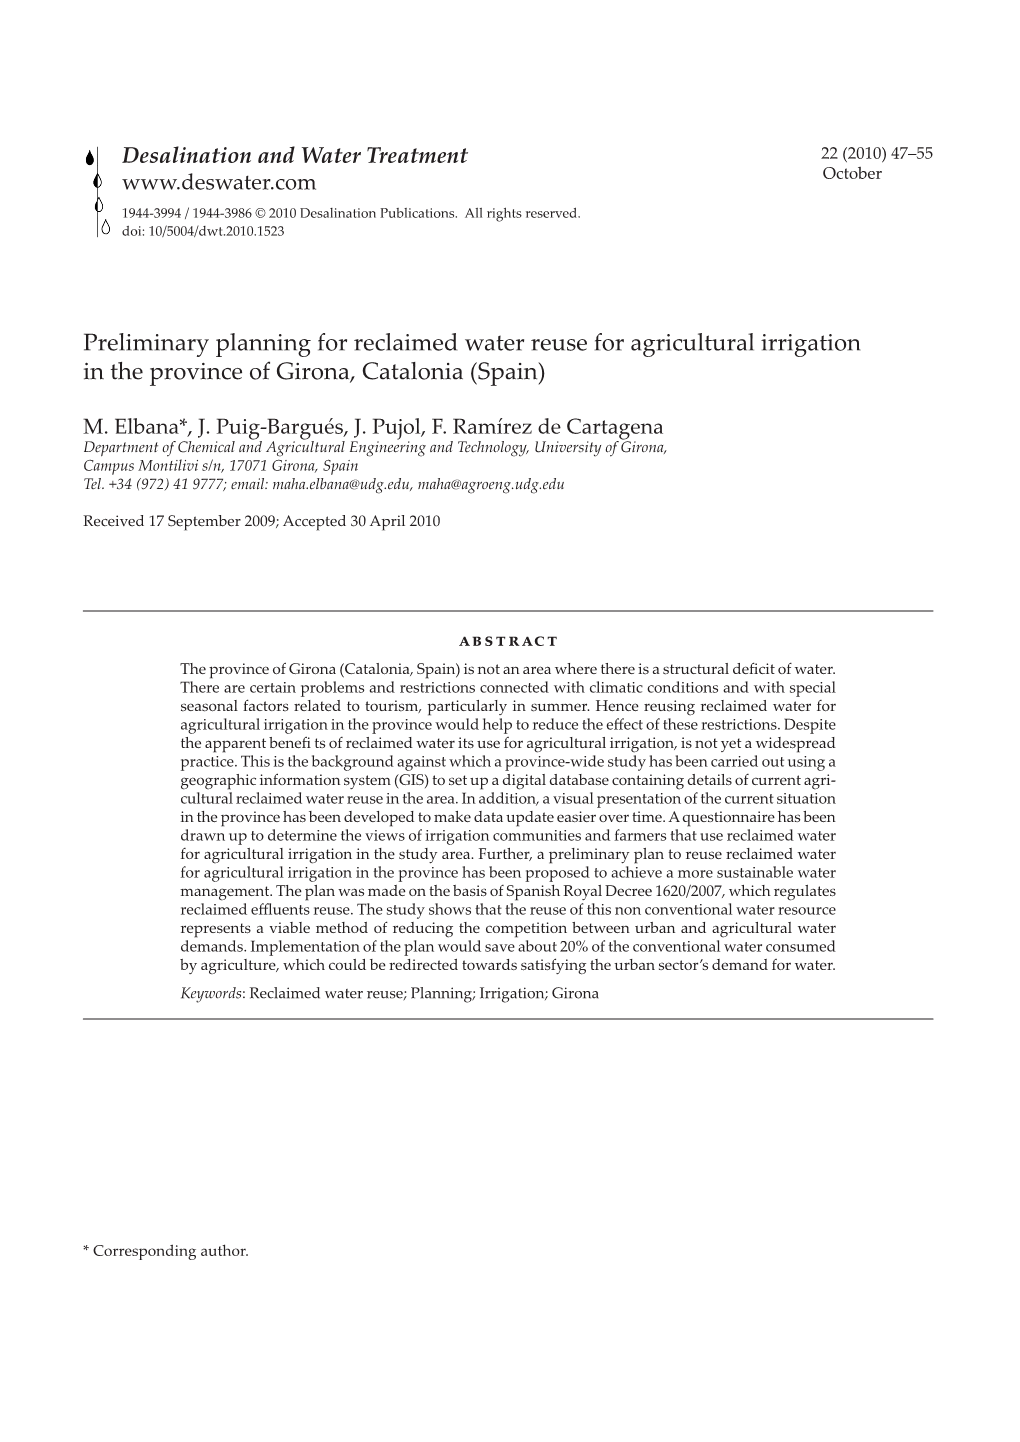 Preliminary Planning for Reclaimed Water Reuse for Agricultural Irrigation in the Province of Girona, Catalonia (Spain)